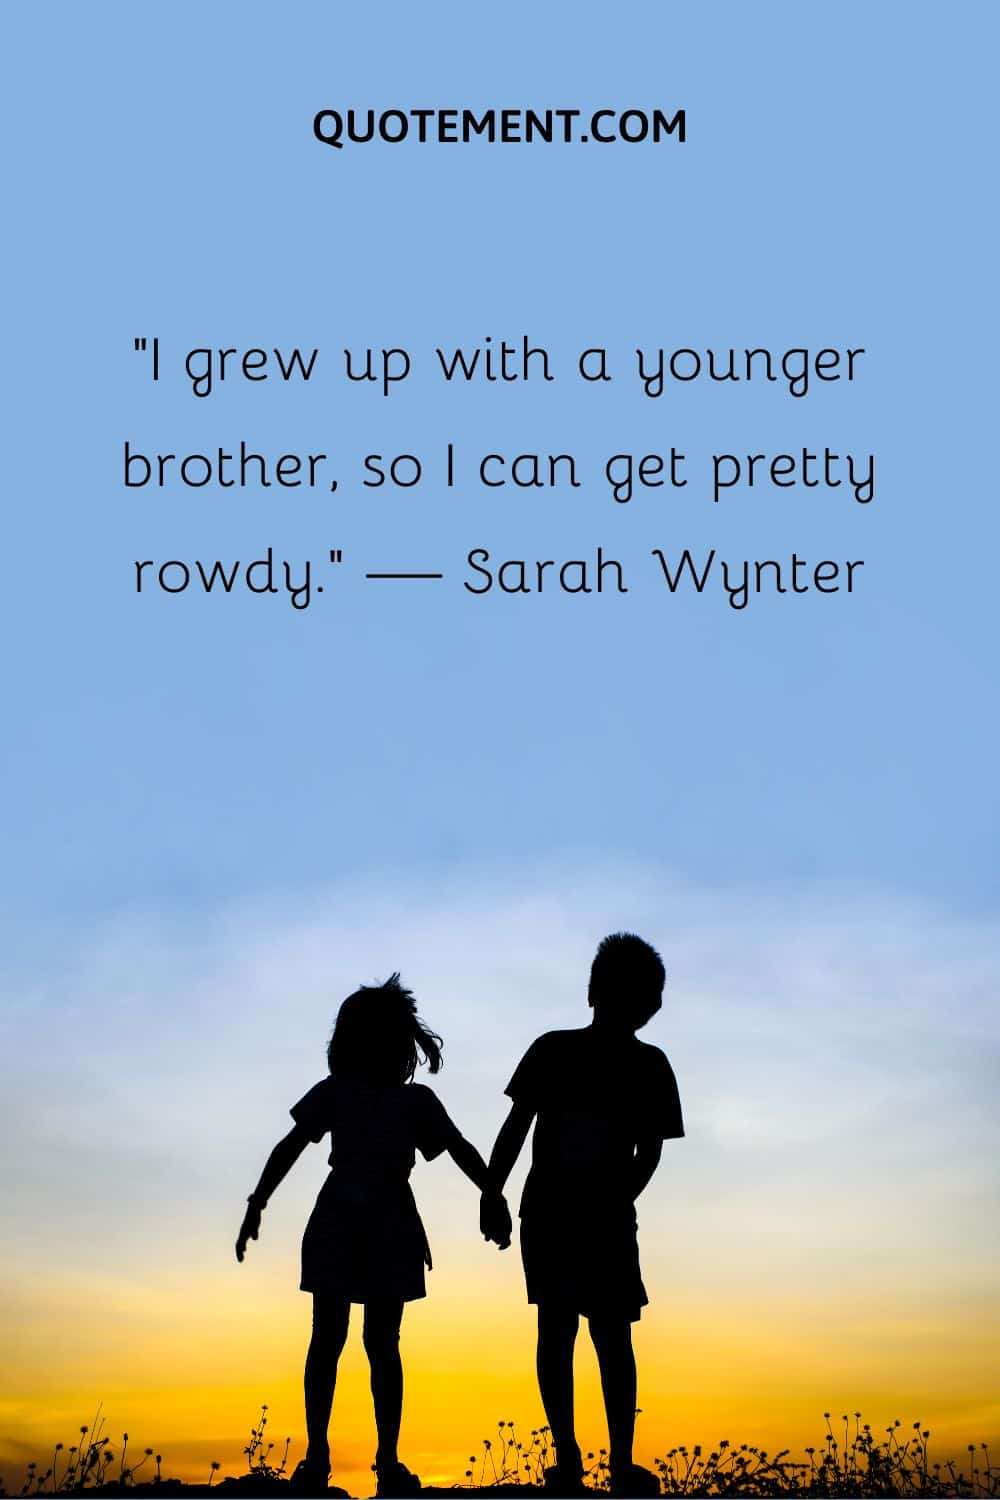 “I grew up with a younger brother, so I can get pretty rowdy.” — Sarah Wynter